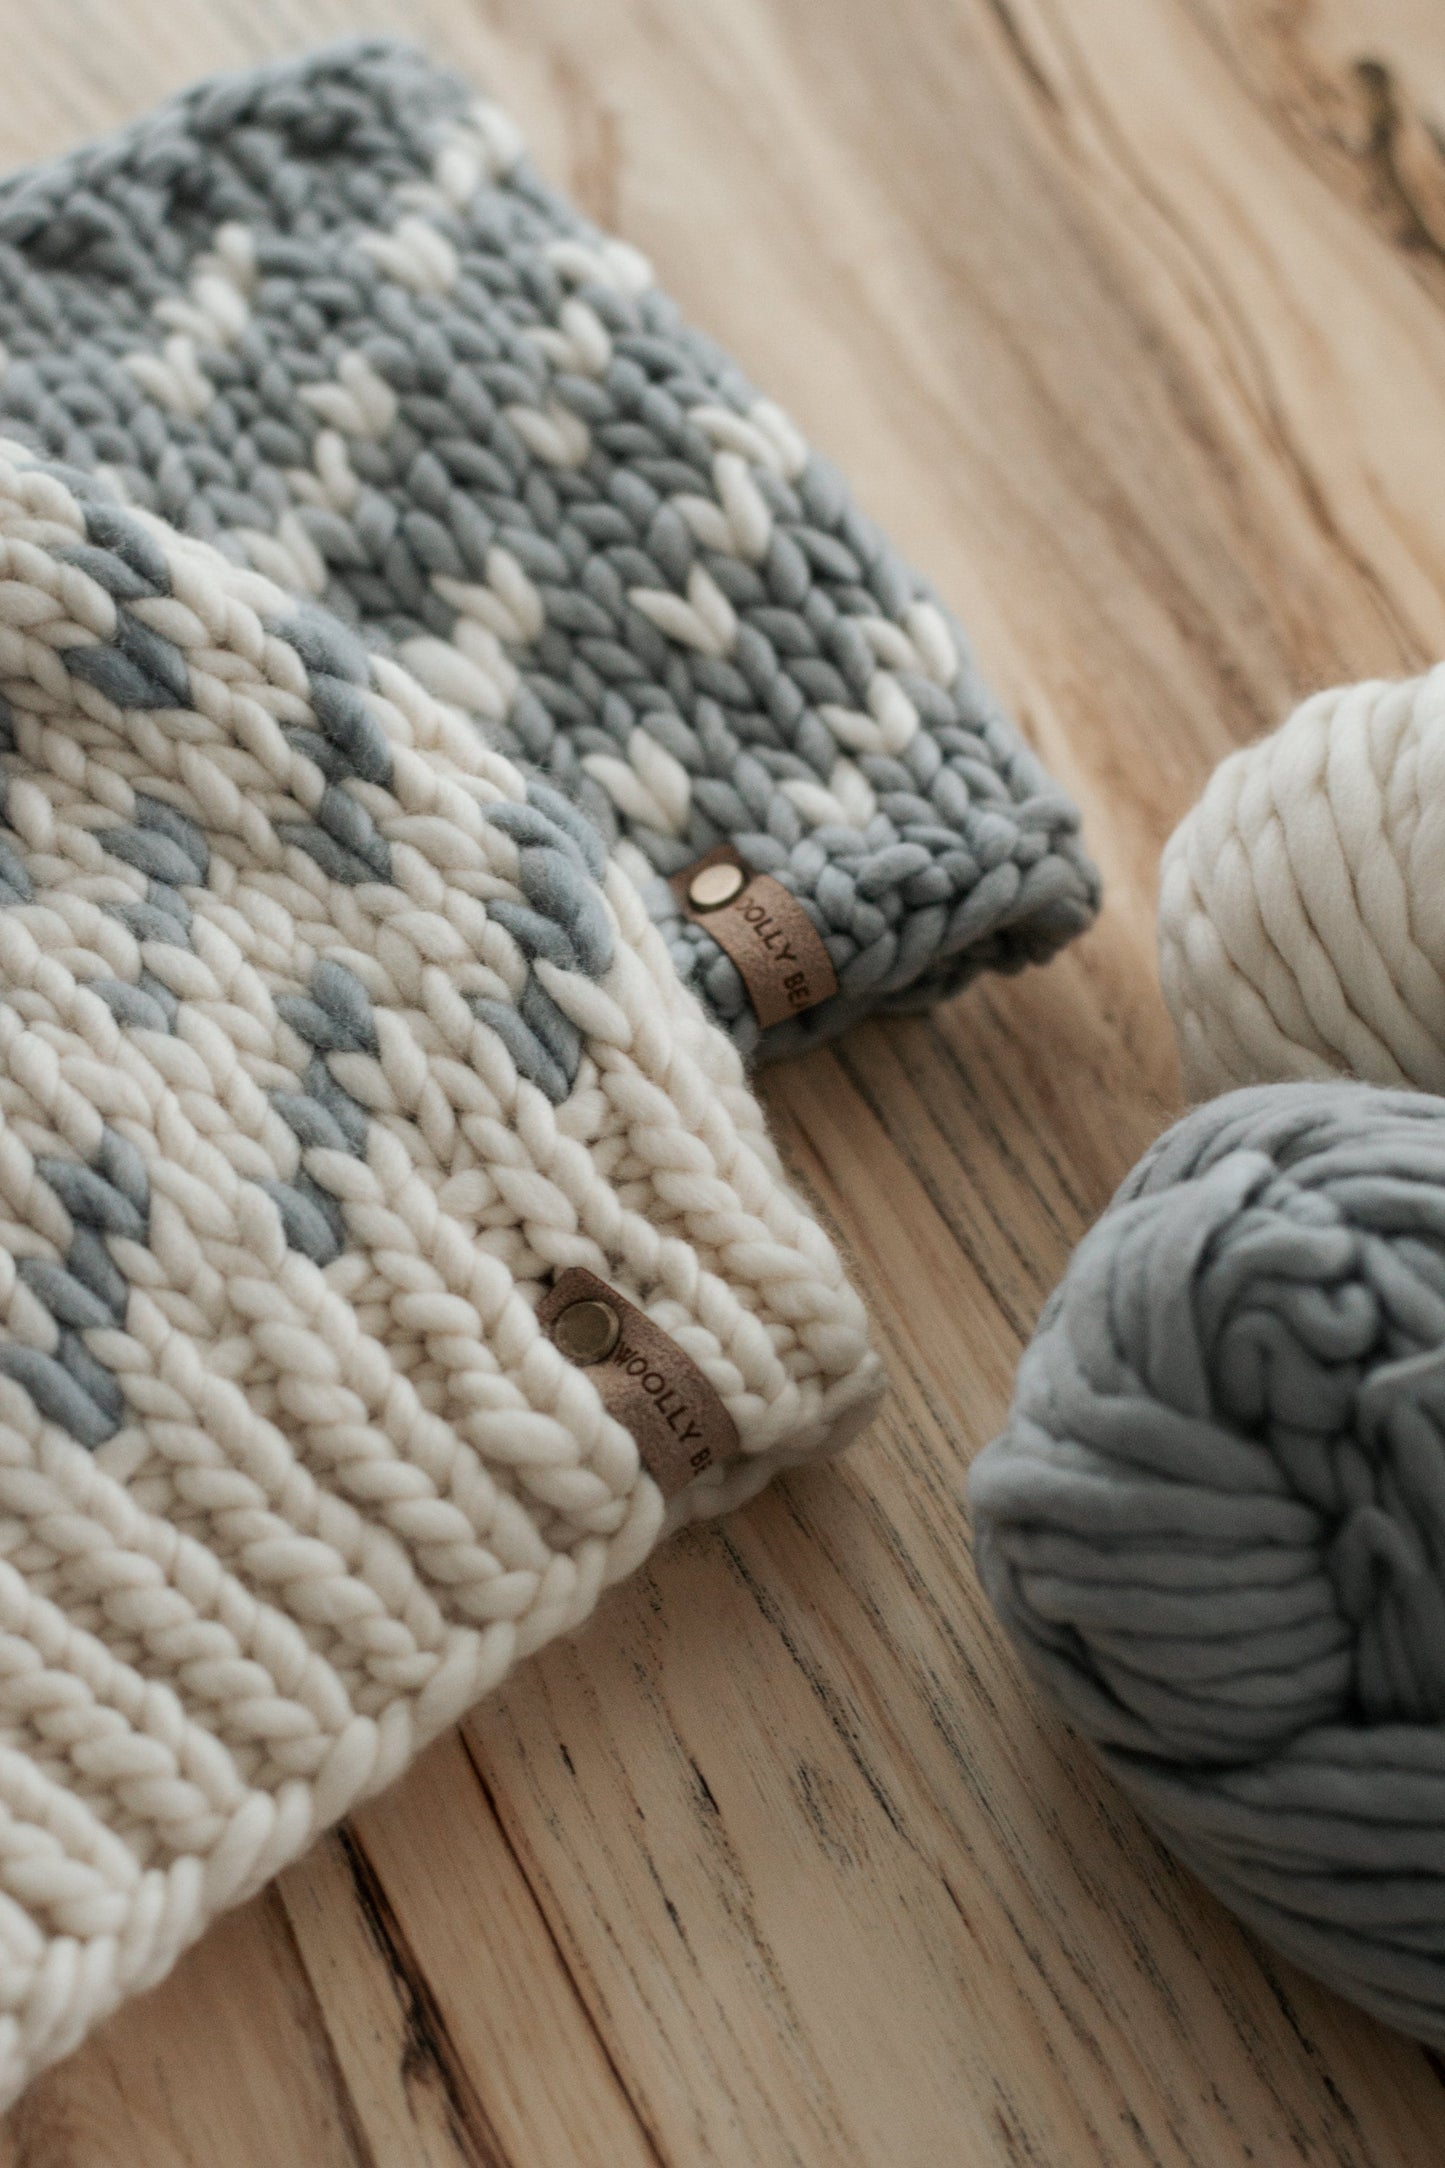 KNITTING PATTERN: Migrations Cowl